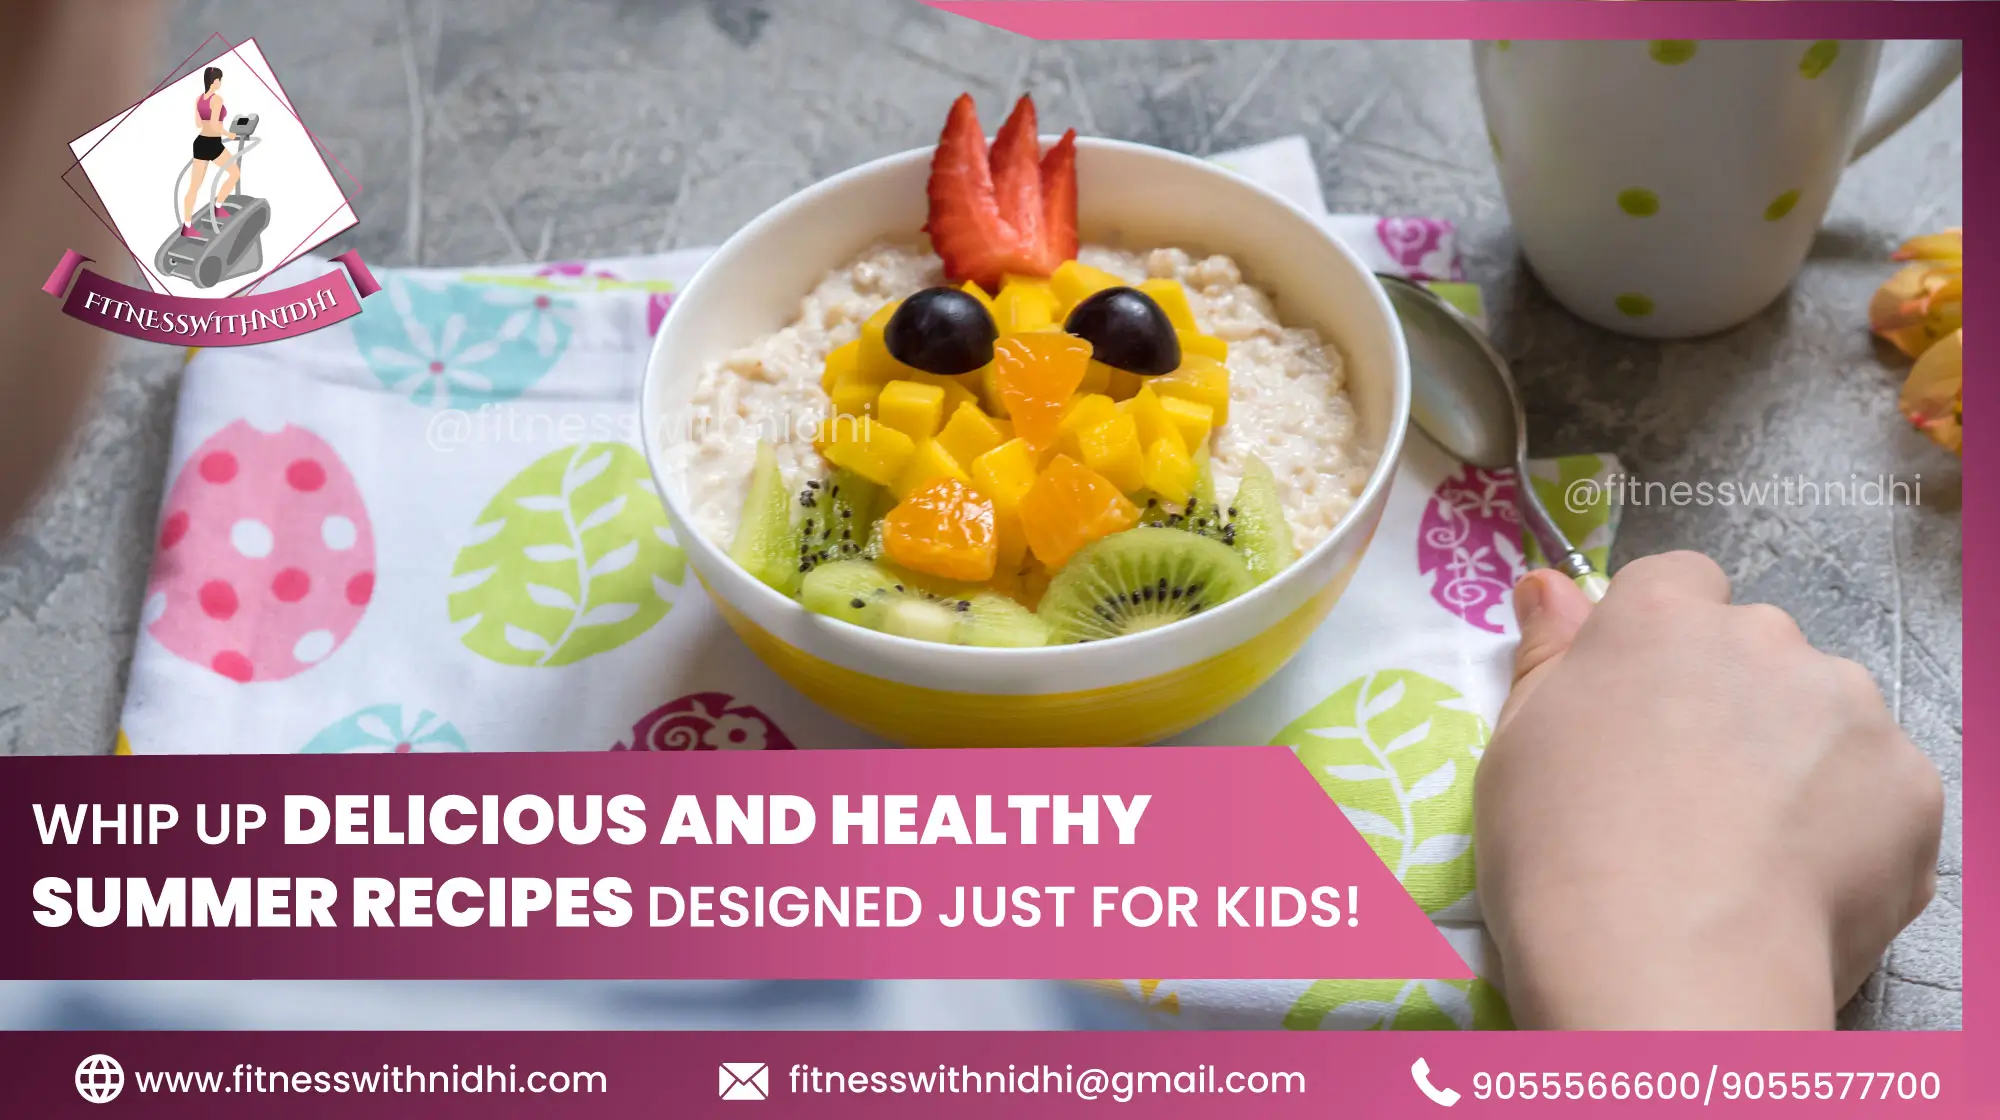 11healthy summer recipes for kids veg and non-veg options